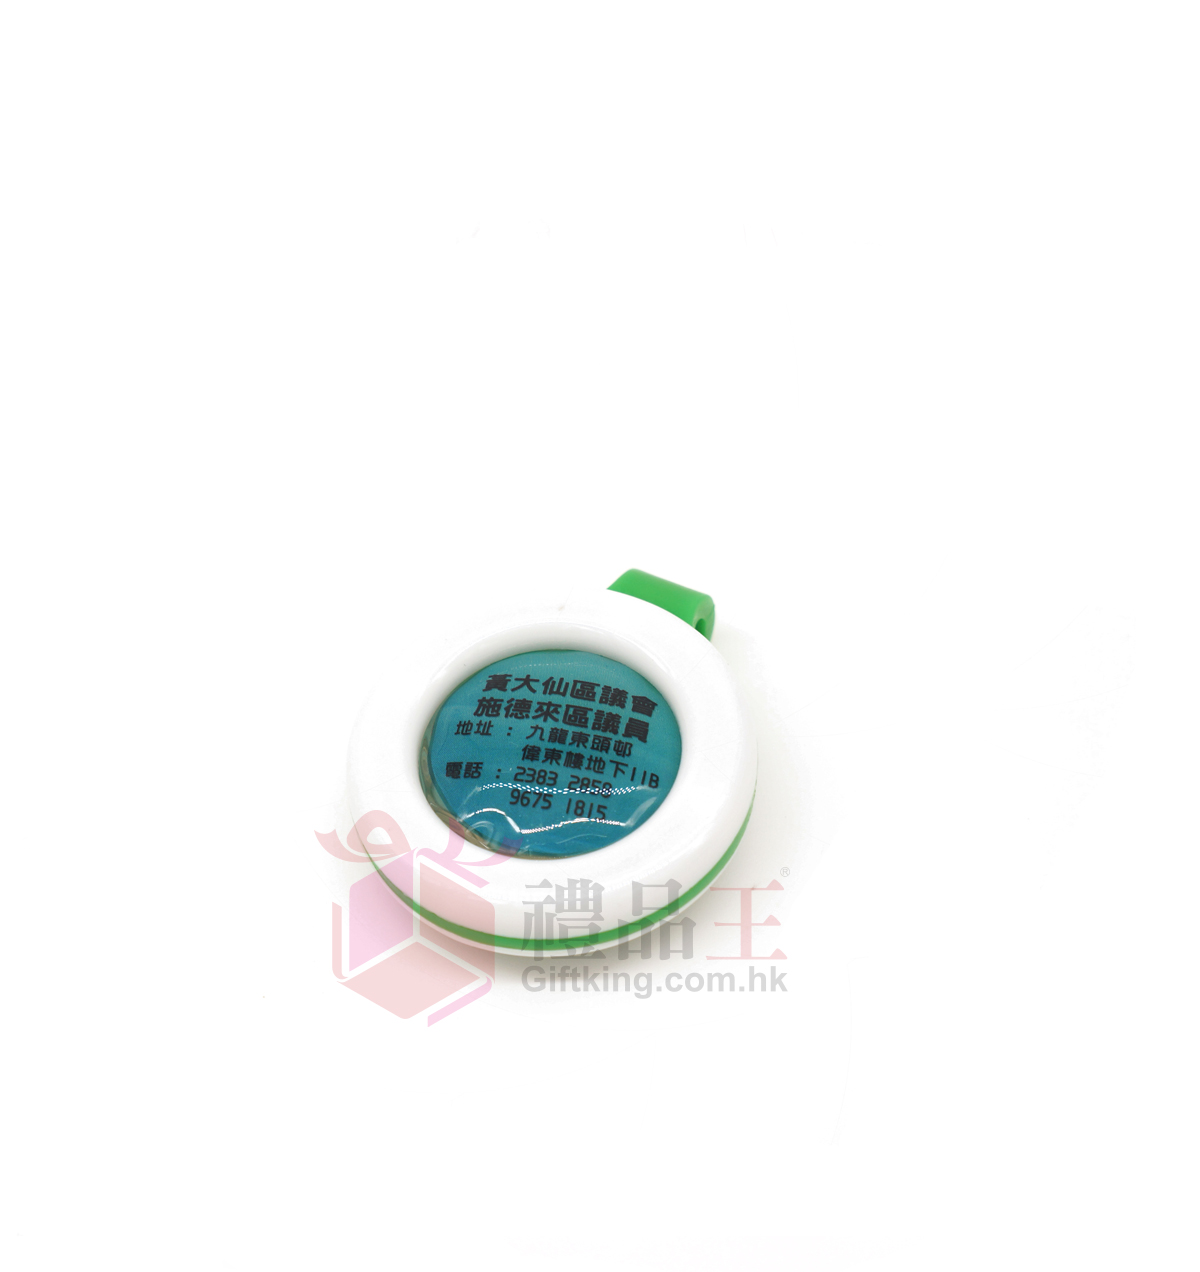 Wong Tai Sin District Council Anti-mosquito buckle (Homeware Gift)